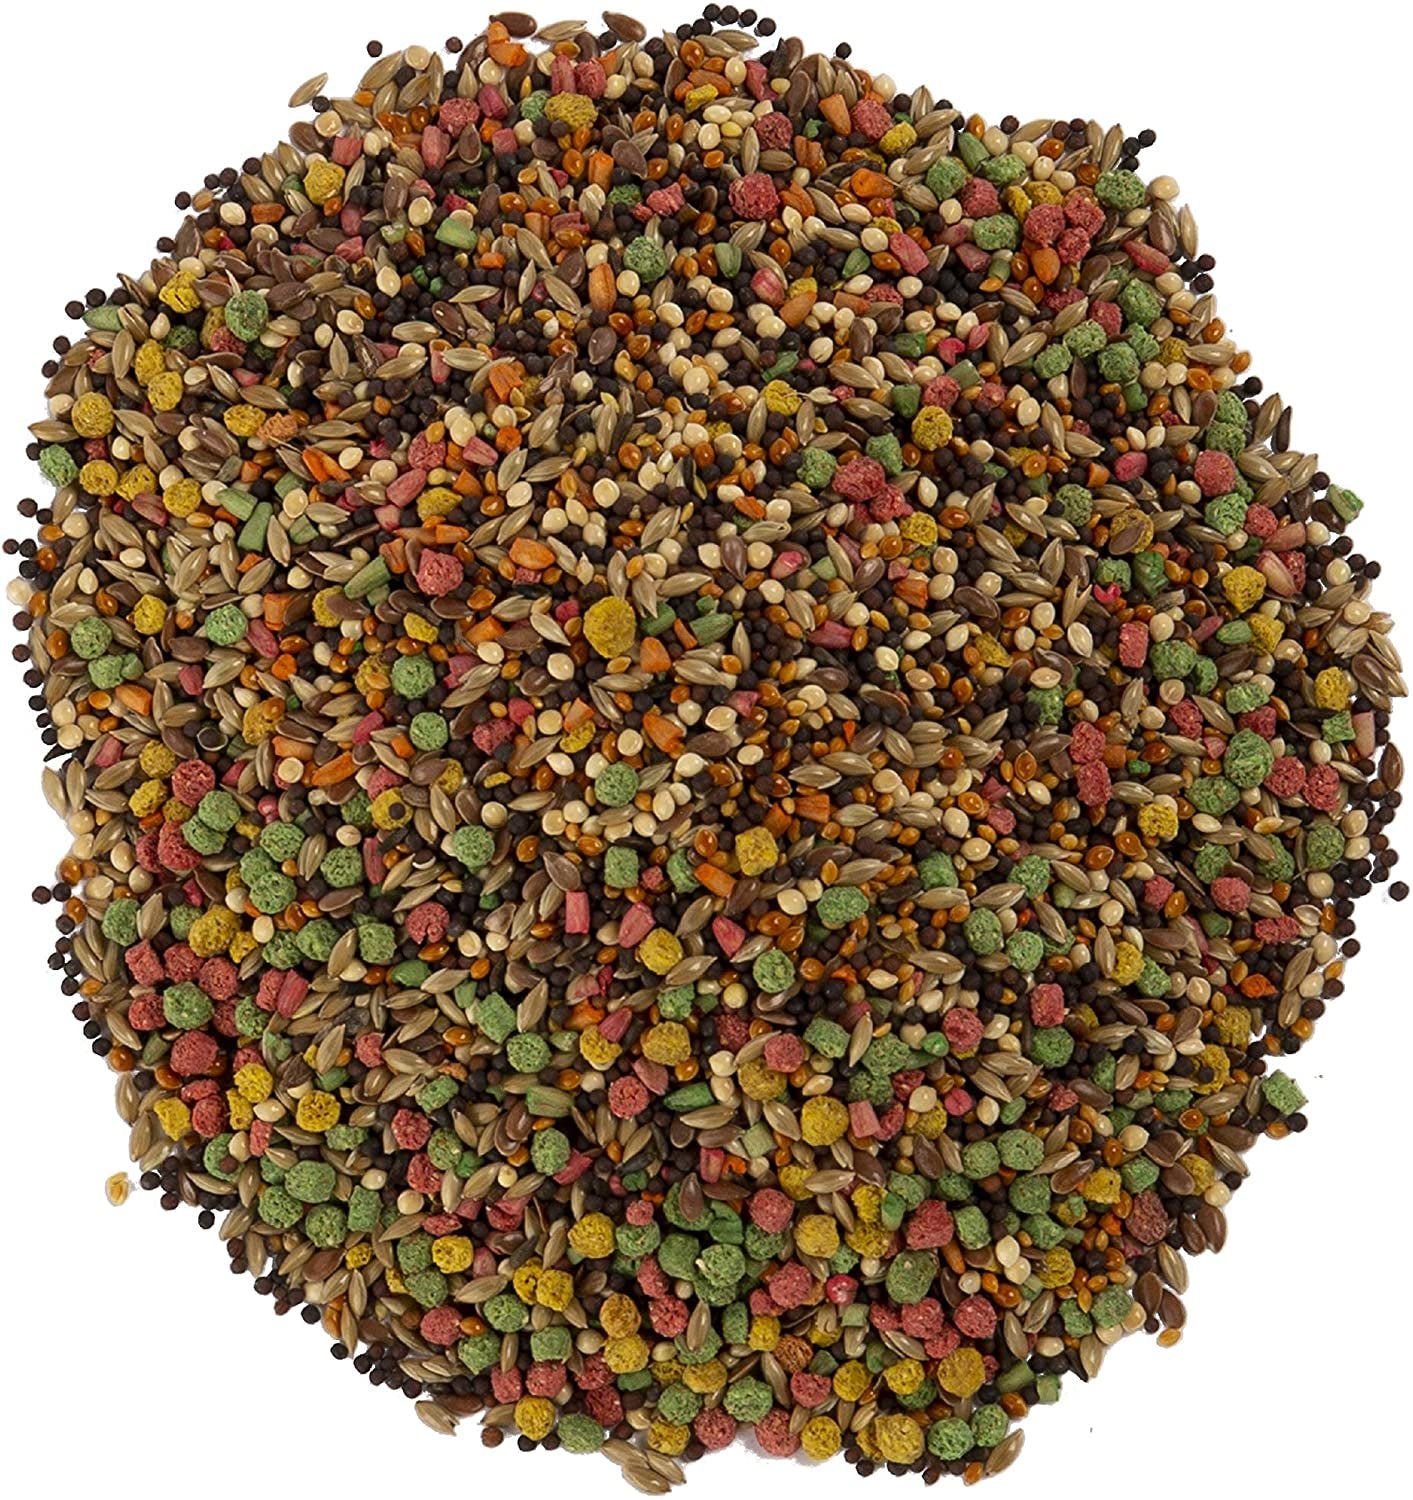 Wild Harvest B12492Q-001 Canary and Finch Food Blend, One Size,2.17 Pound